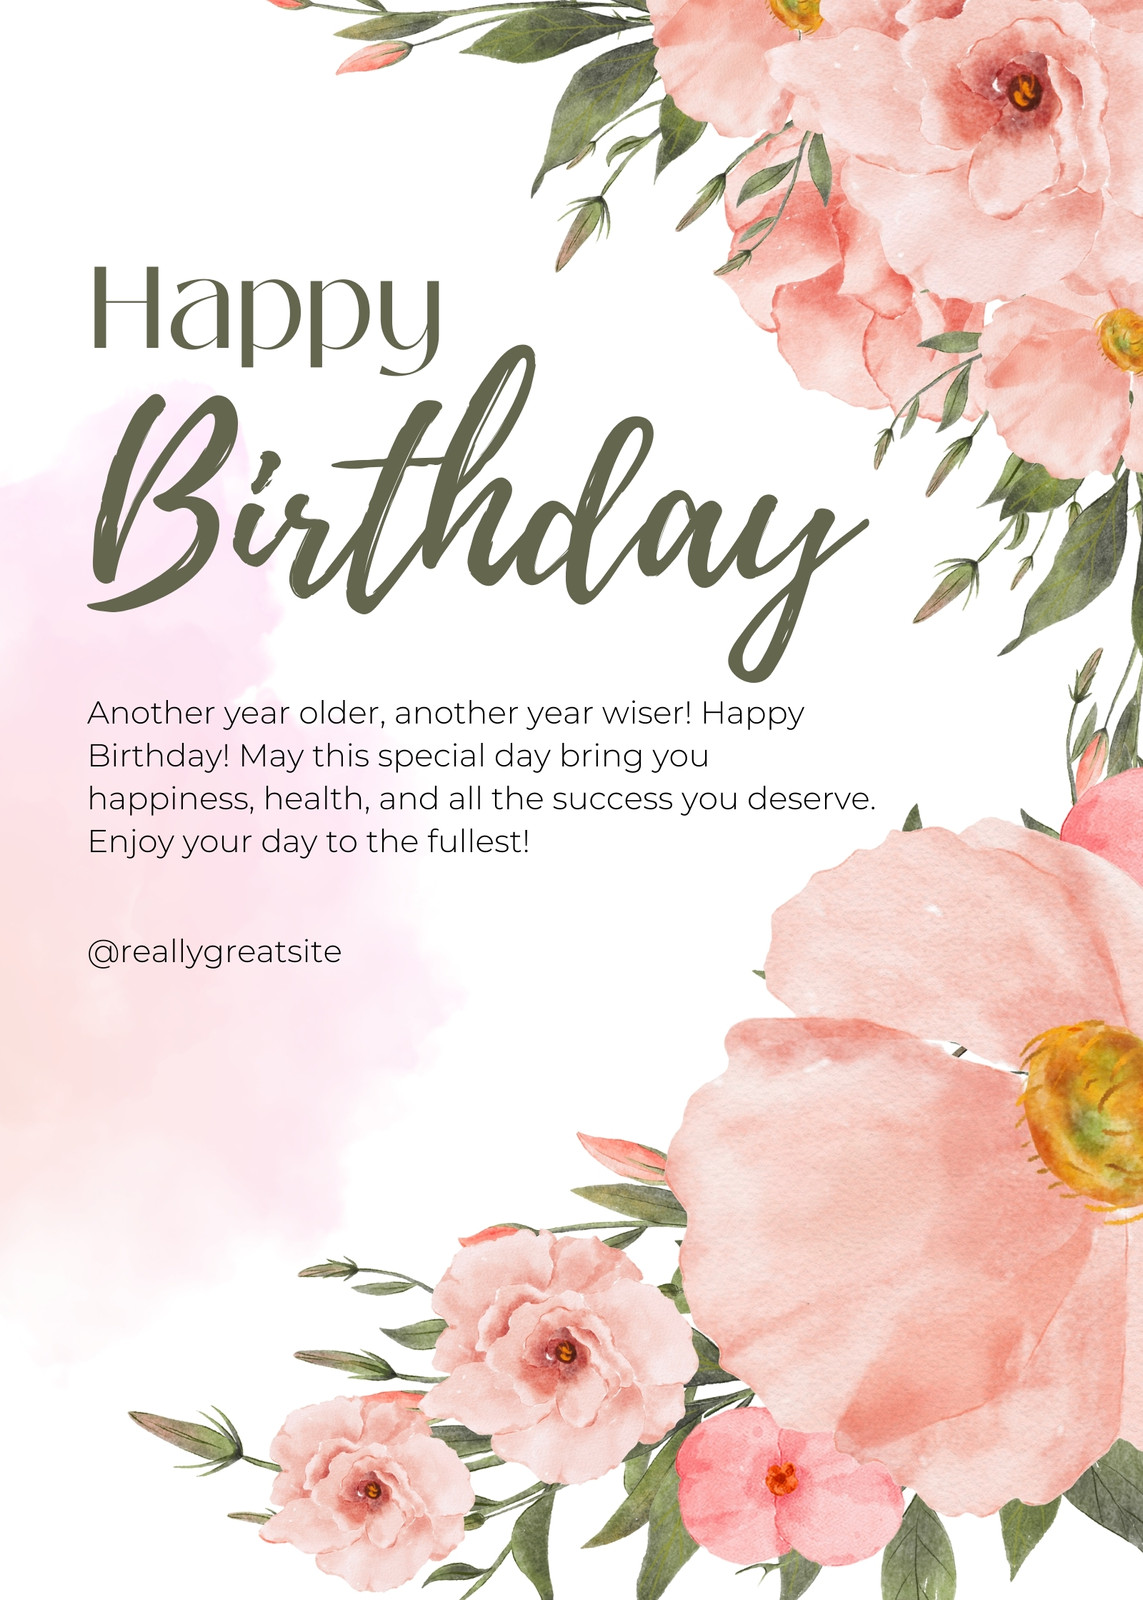 Premium Photo  Happy birthday text on card in flower bouquet on pink  background. flower delivery, congratulation card. greeting card in pink red  roses.